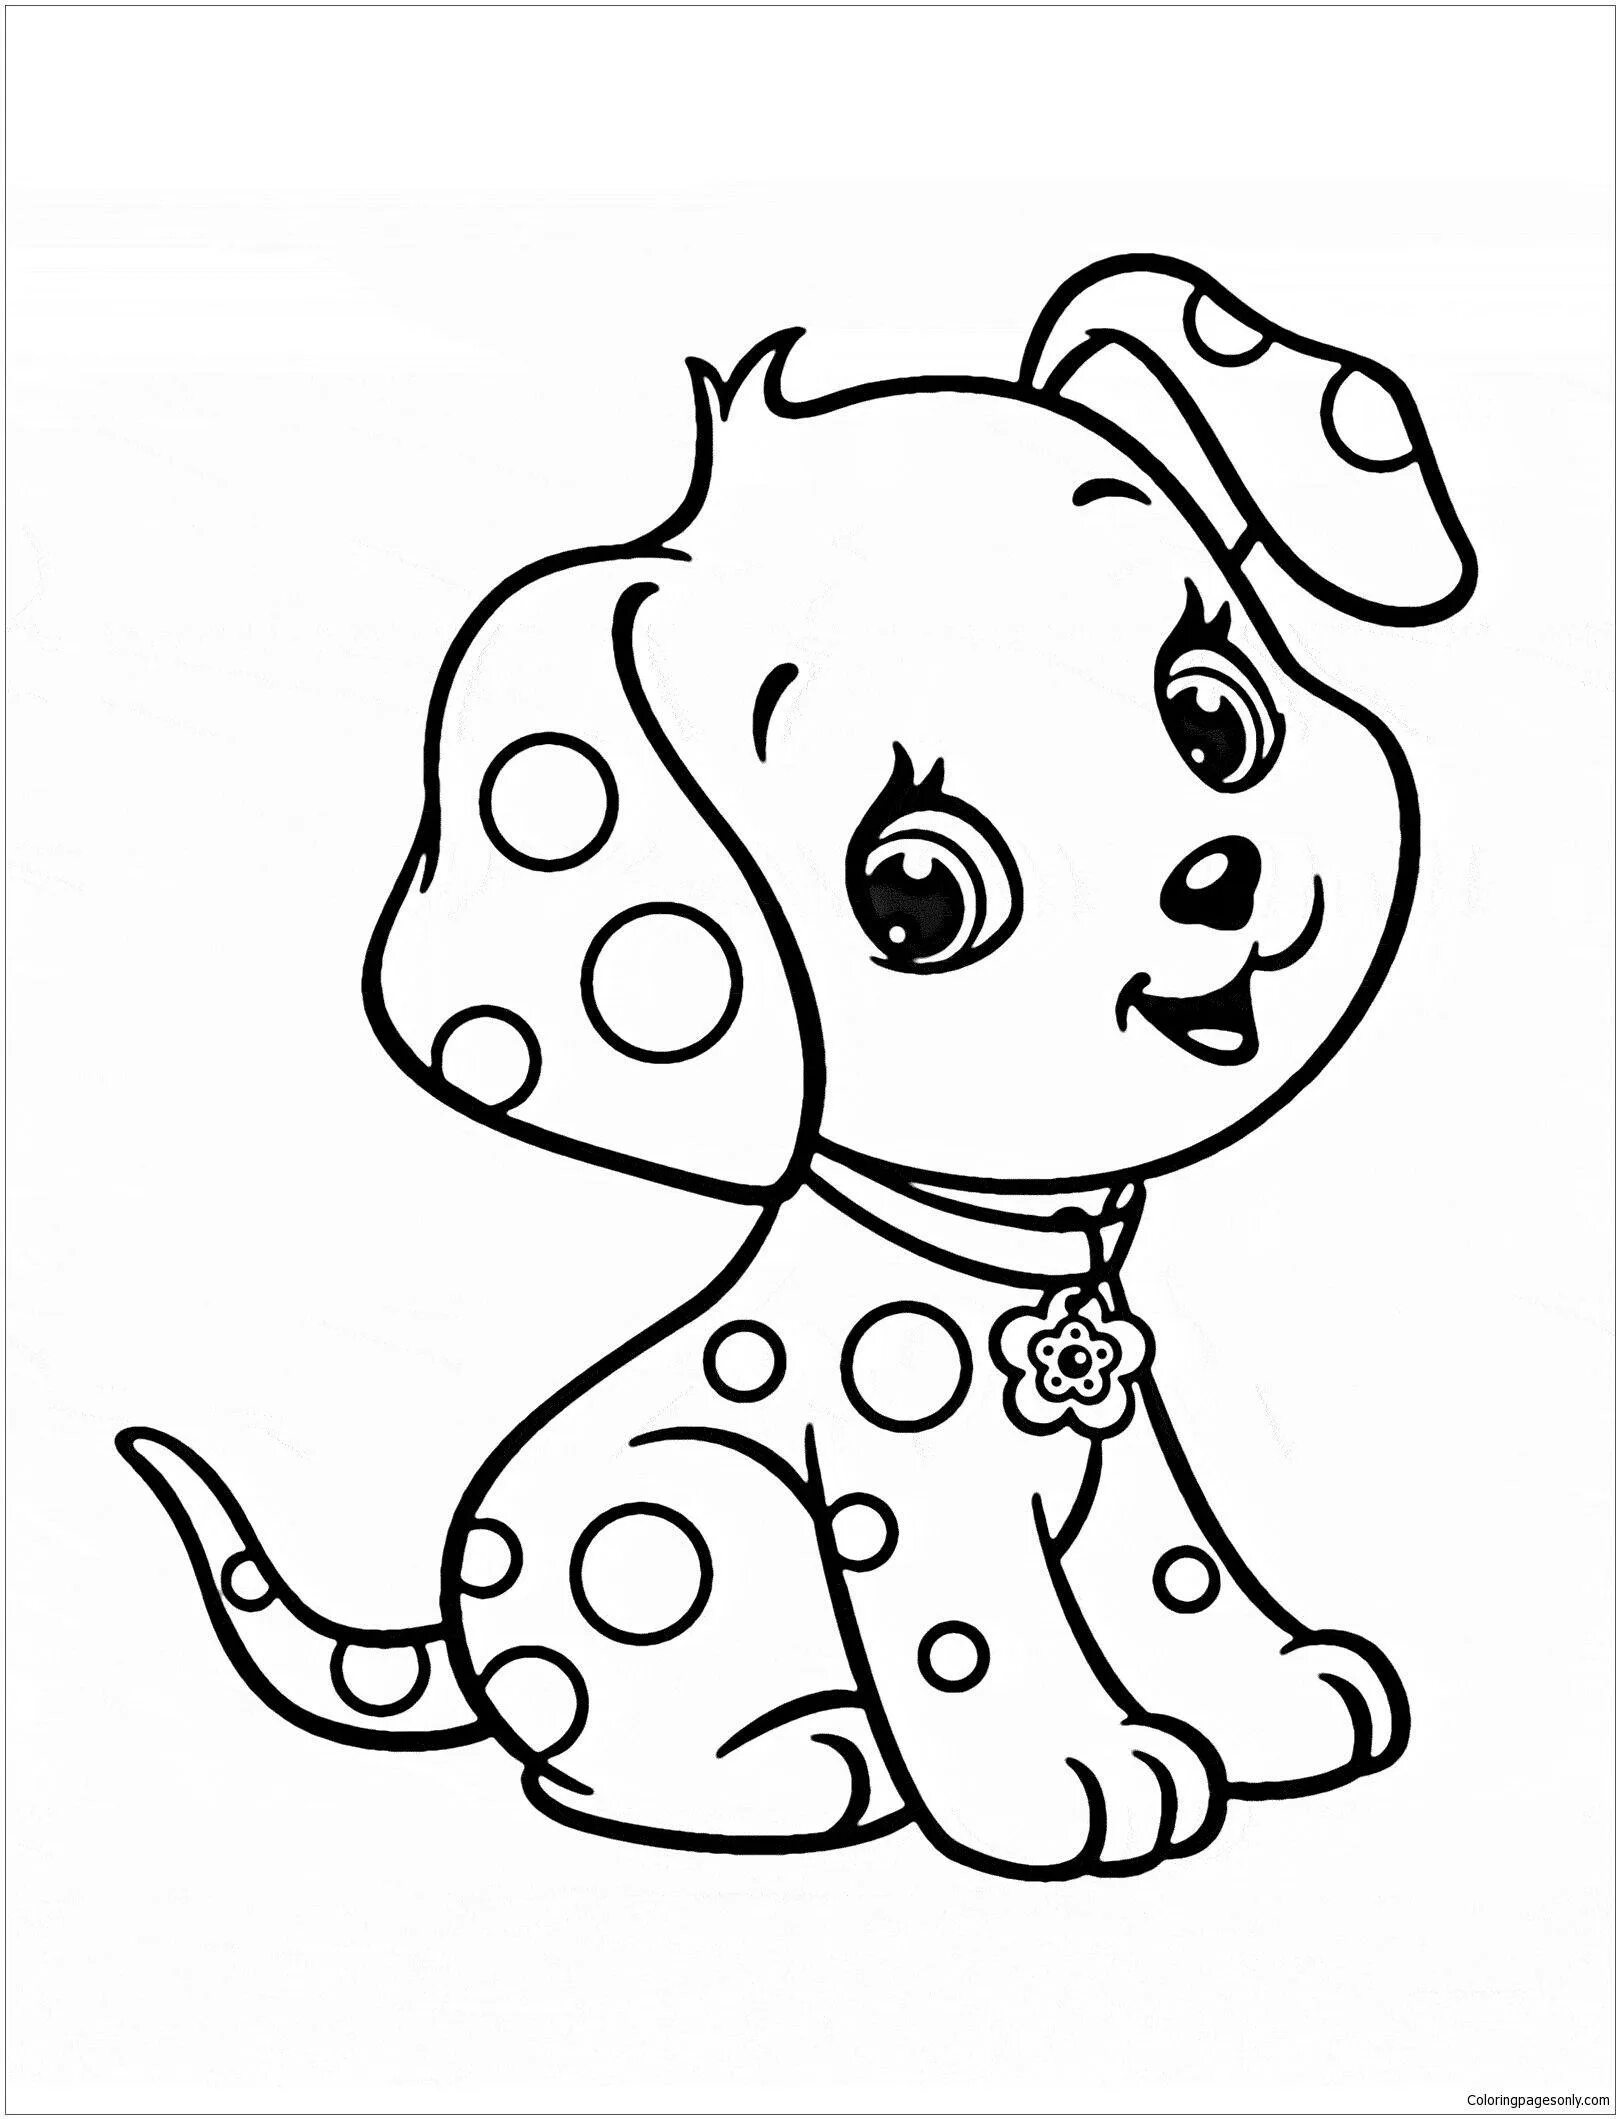 Spectacular dog coloring book for children 6-7 years old